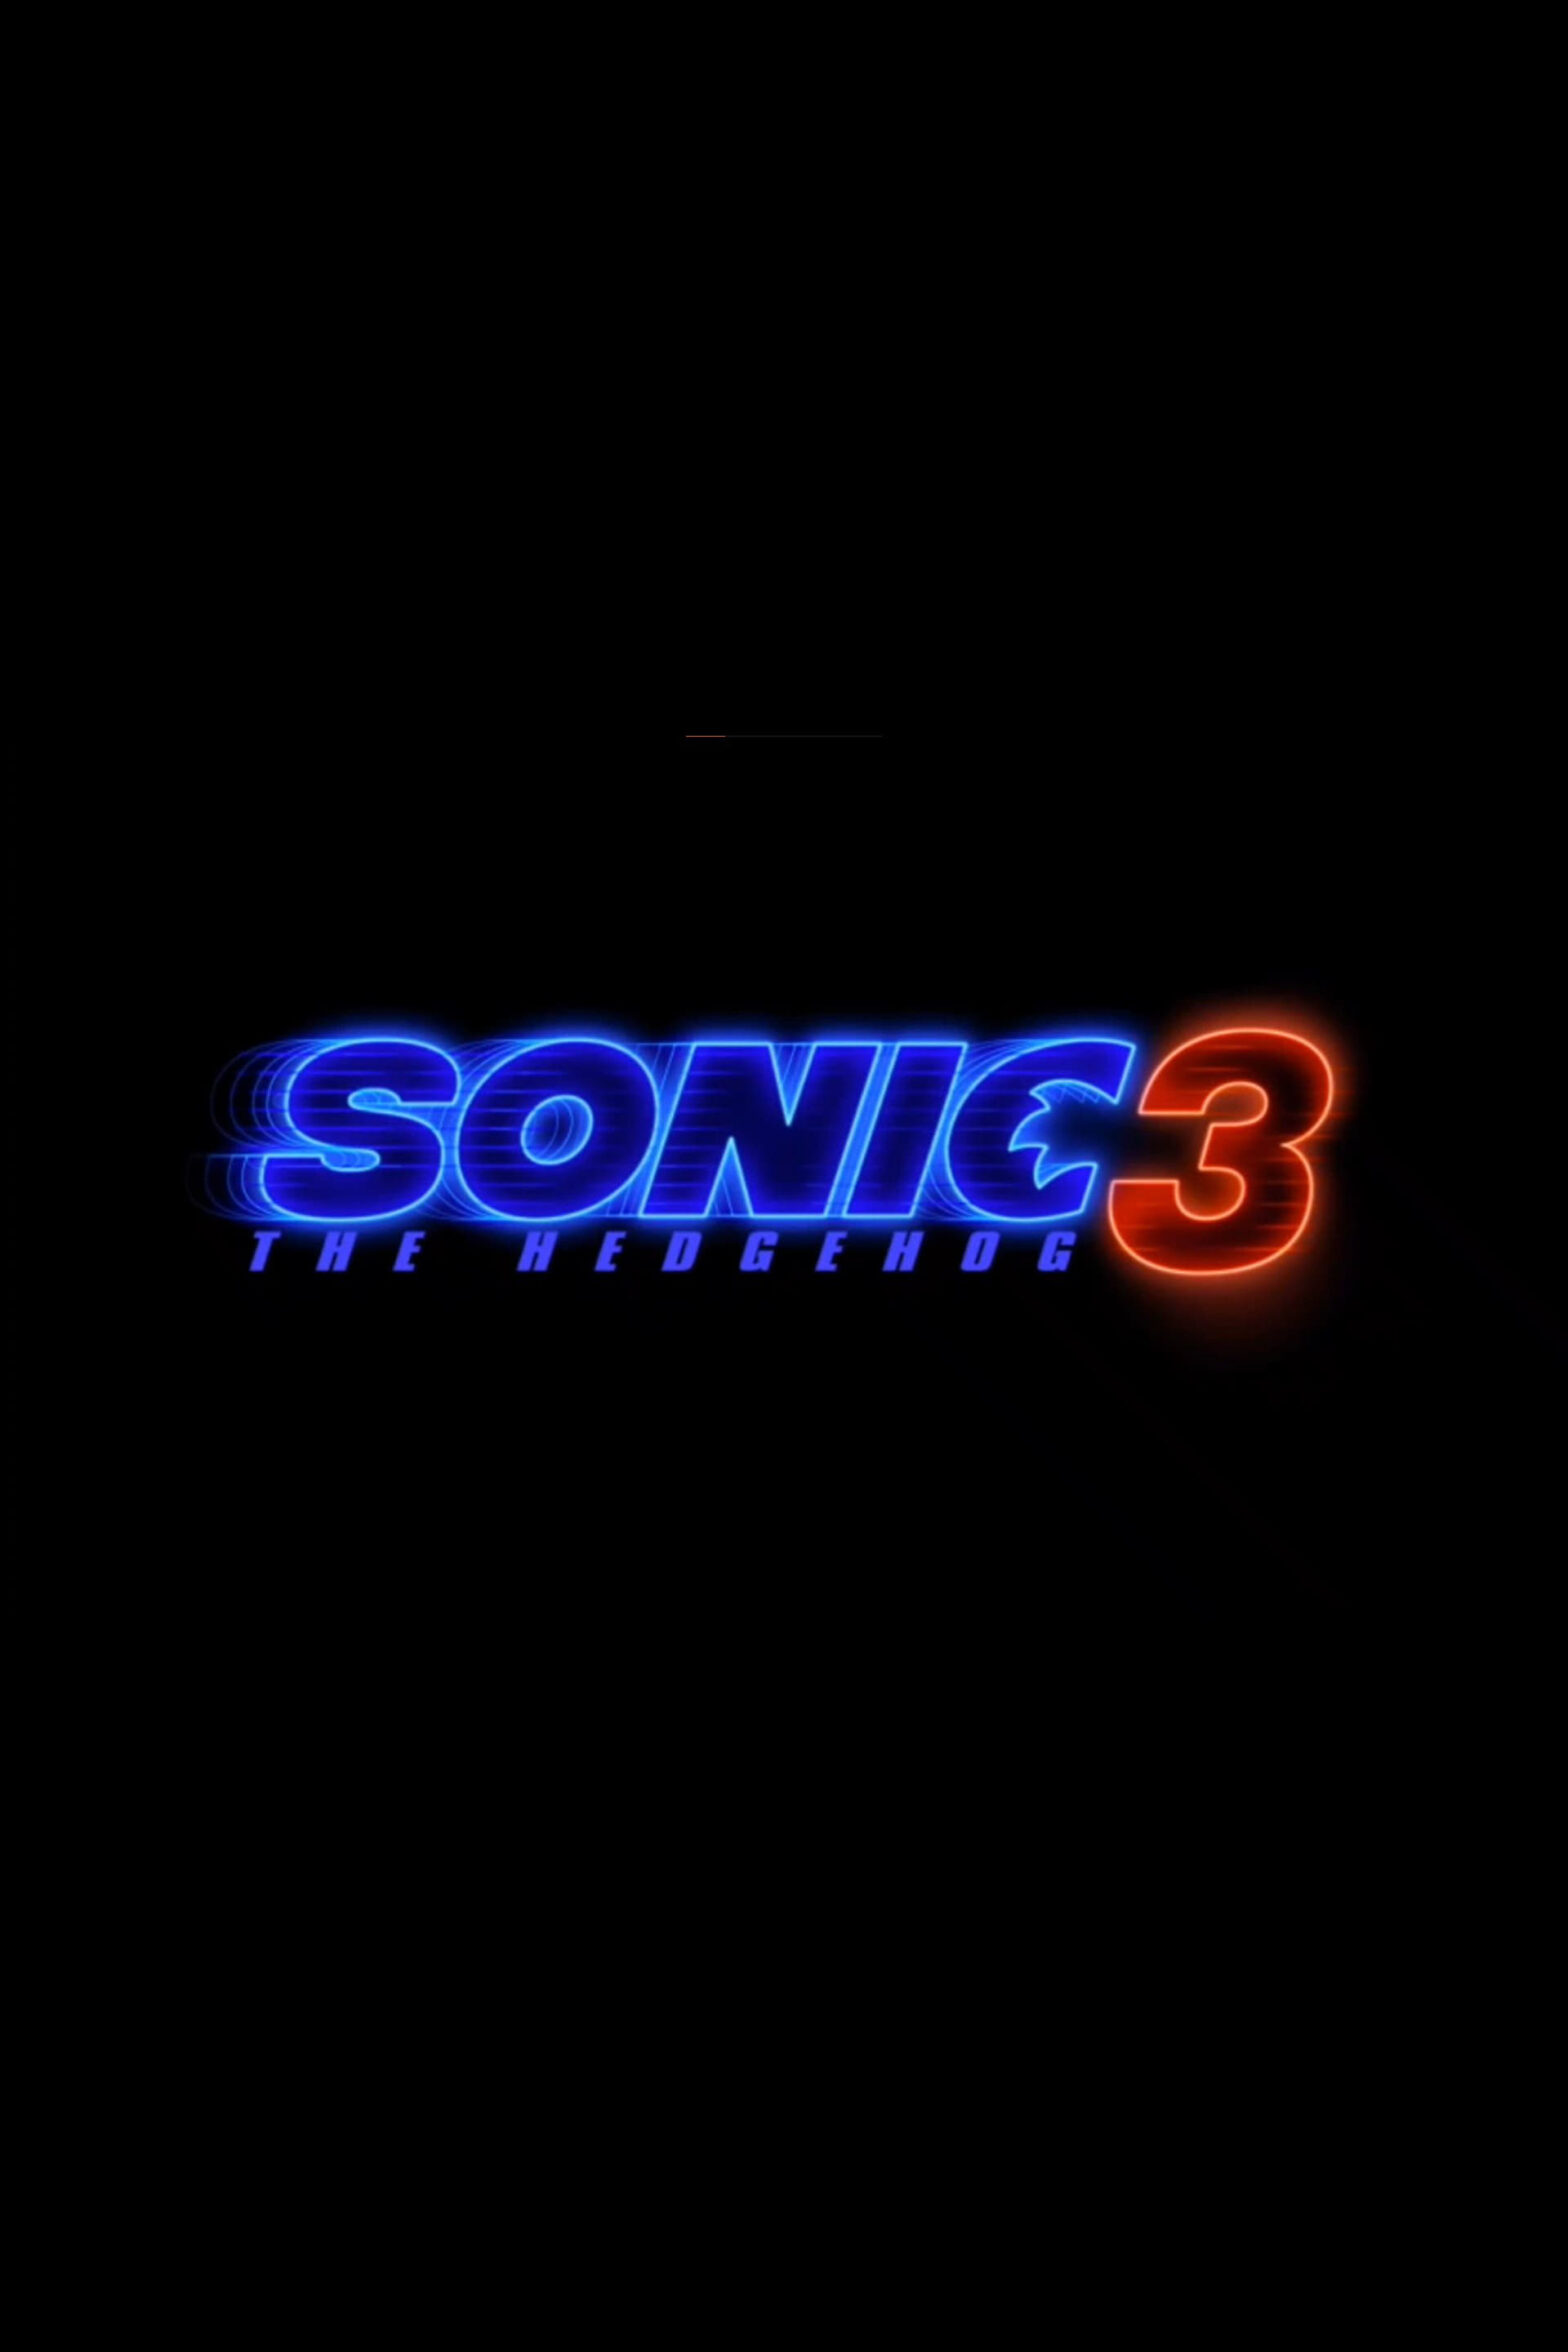 Poster for the movie "Sonic the Hedgehog 3"